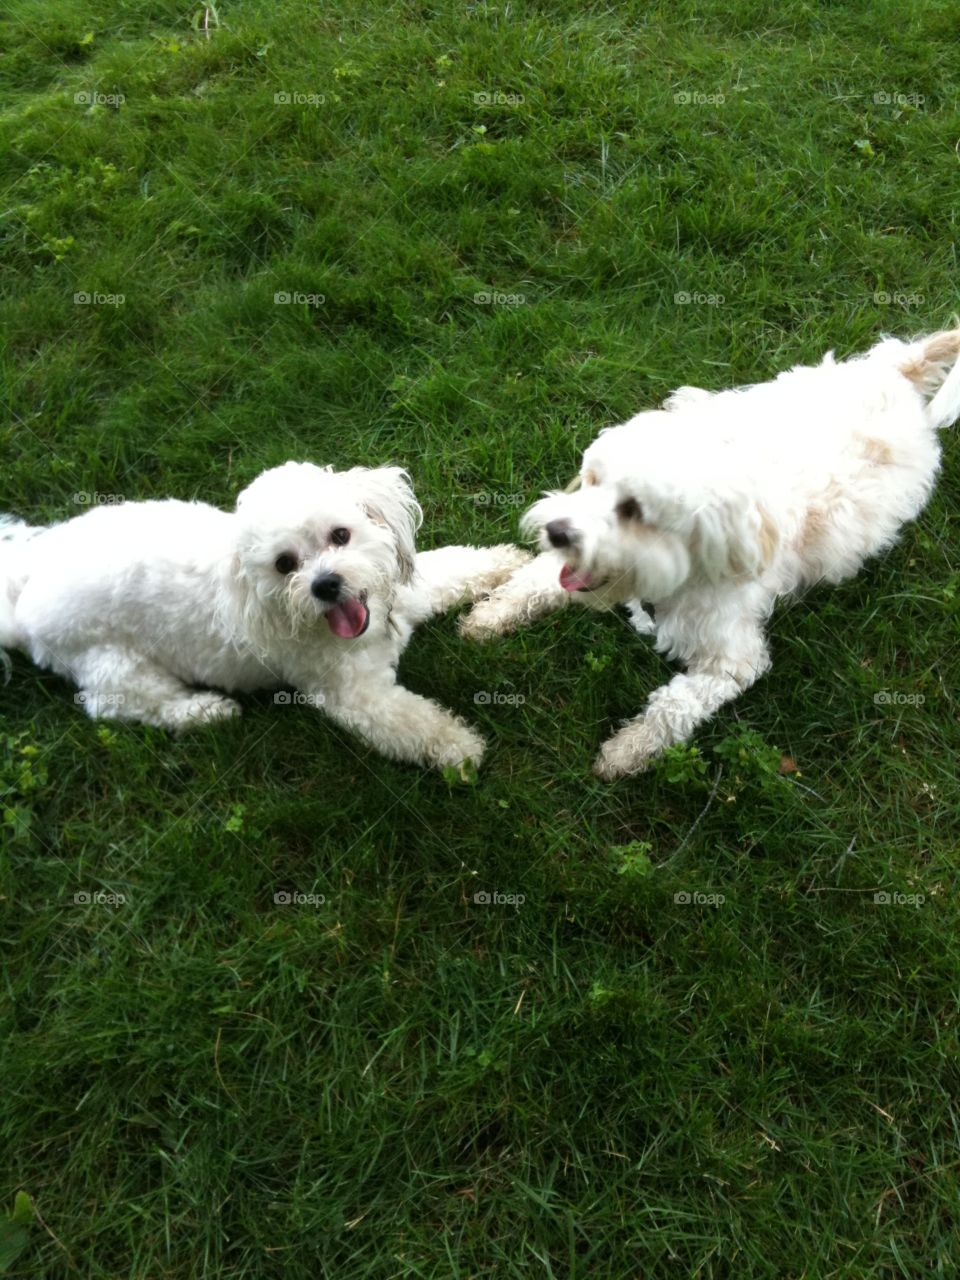 Fluffy Buddies. Cooper and his pal enjoying a play date 